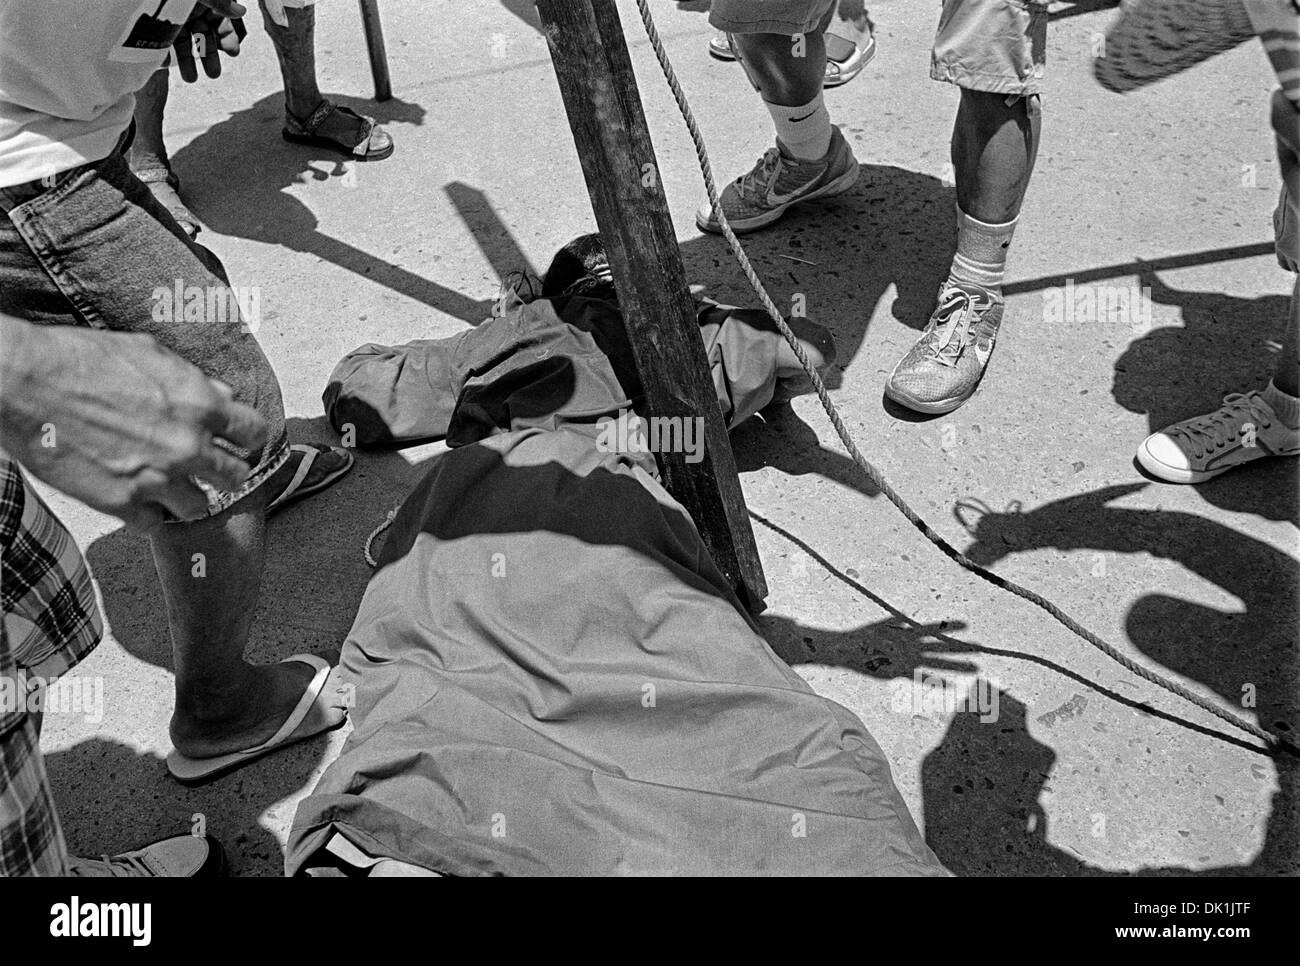 San Fernando; Pampanga; Philippines - March 29, 2013: Penitent fell after carrying a cross during penitential rites Stock Photo